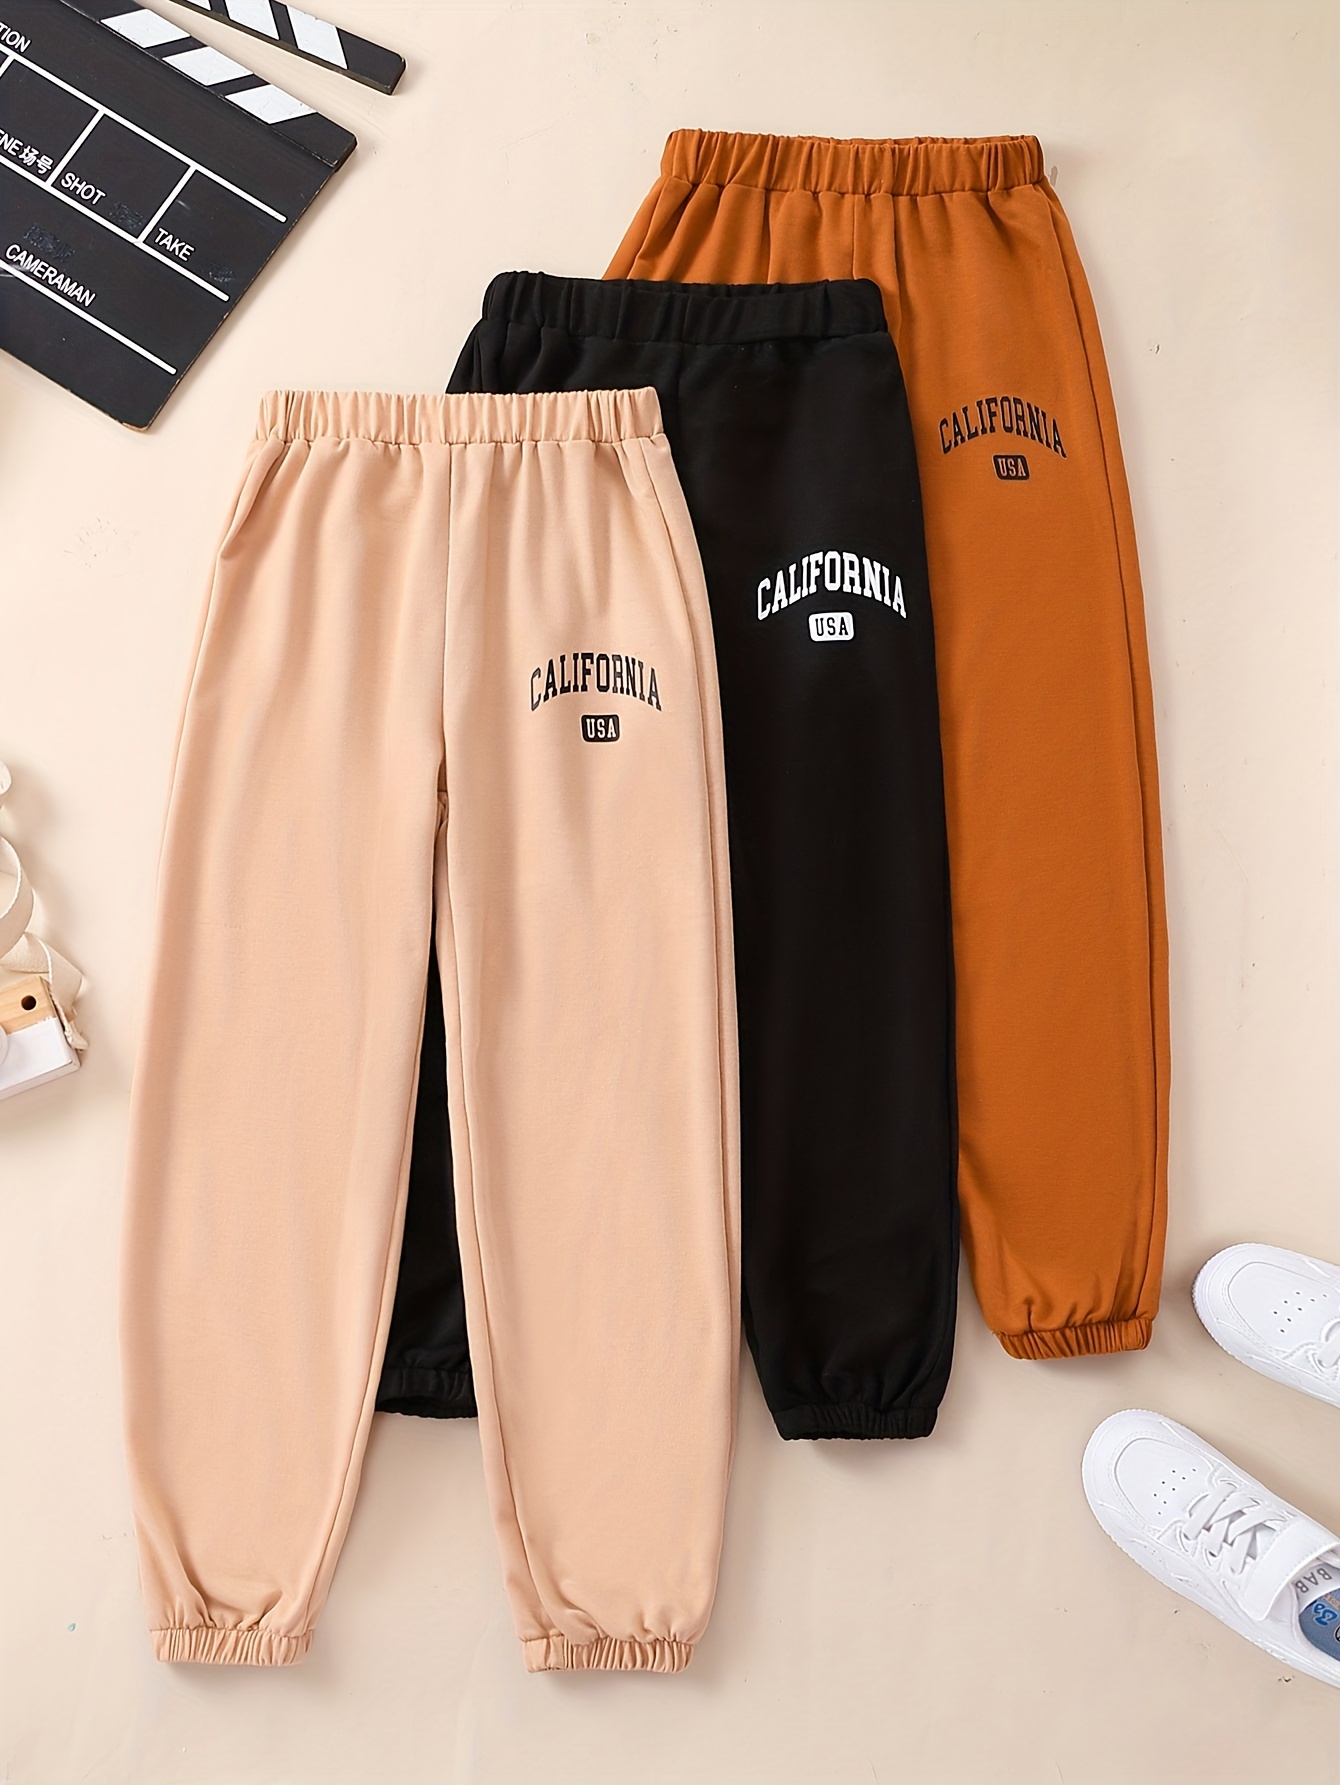 Girls Supply - Loose-Fit Sweatpants in 5 Colors